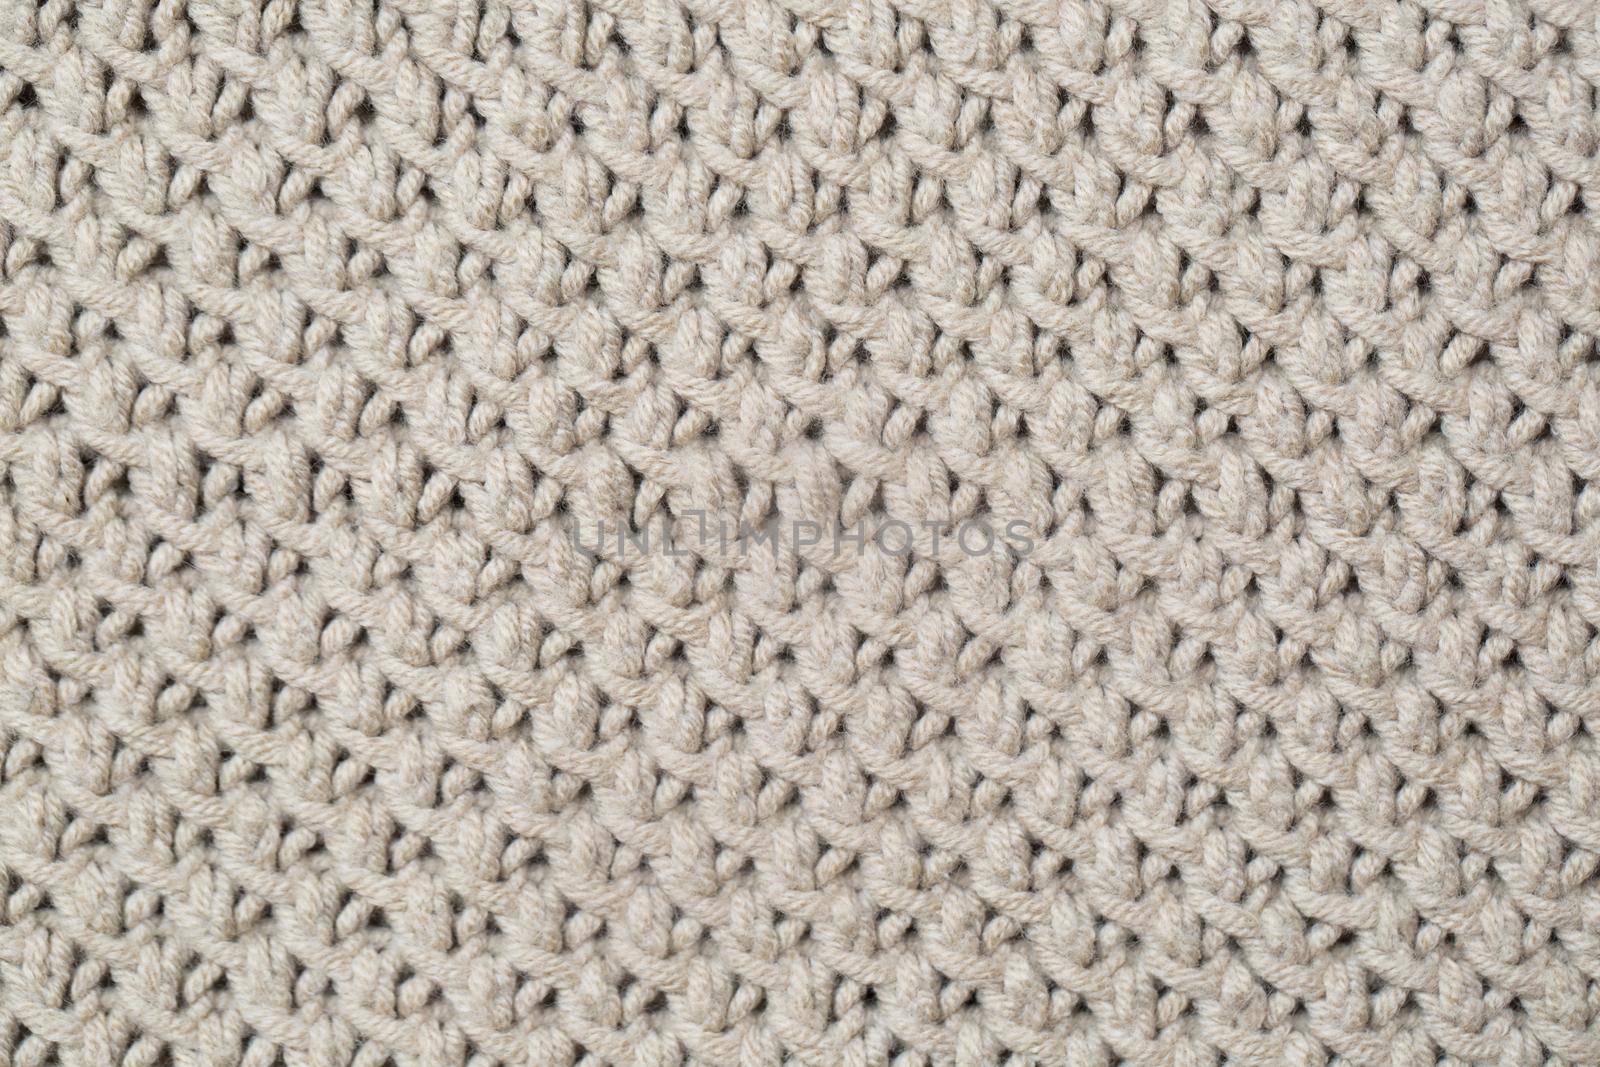 knitted fabric background texture by StudioPeace